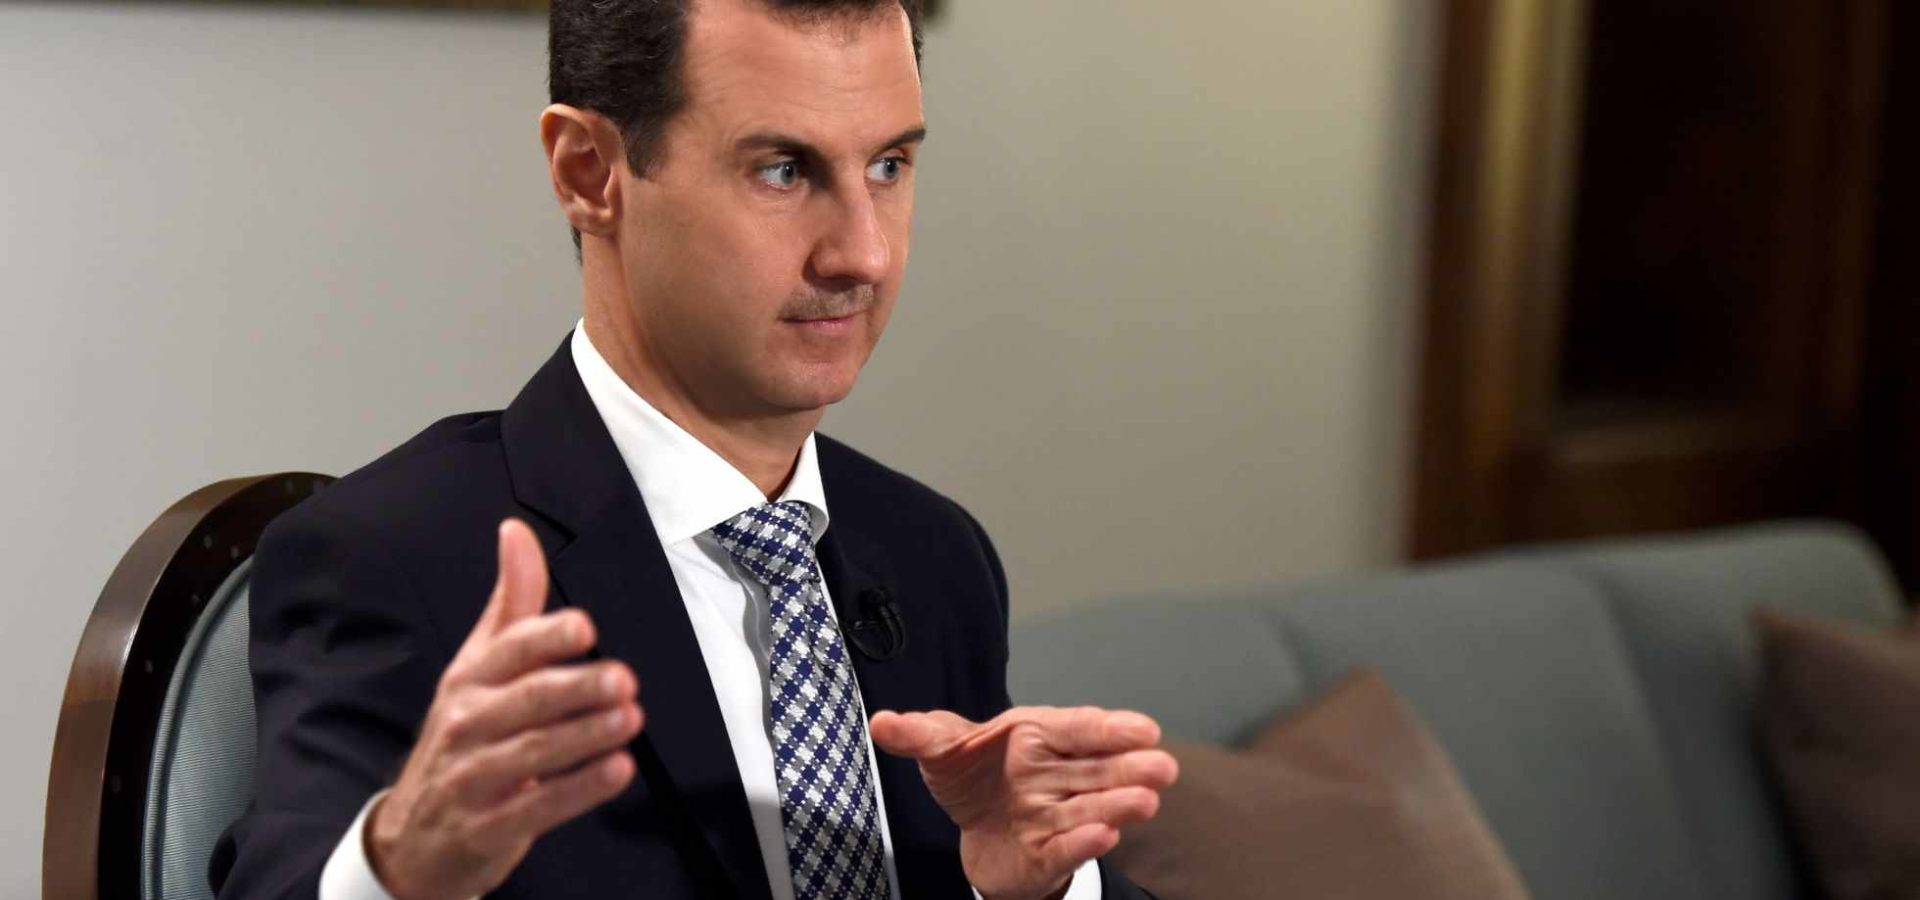 Bashar al-Assad during the interview in Damascus on Saturday. SYRIAN PRESIDENT’S OFFICE